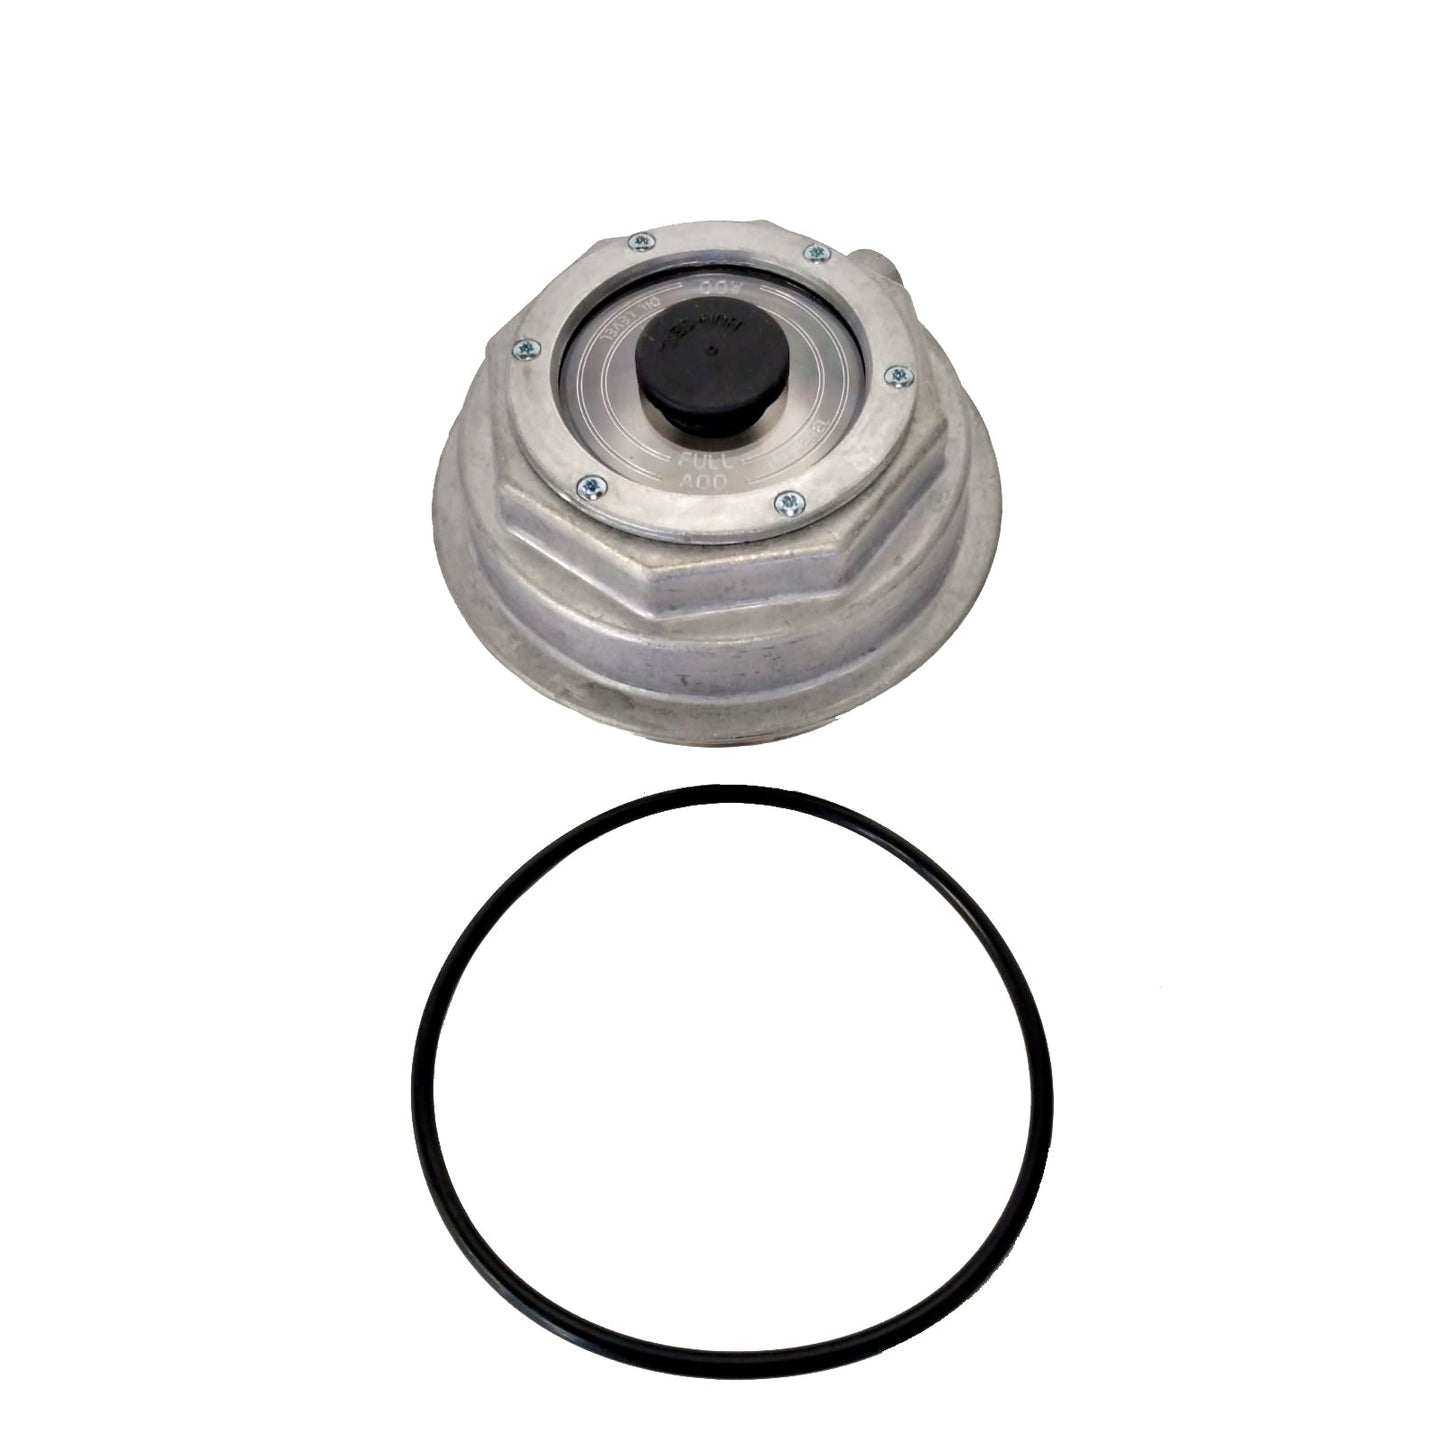 Fortpro Threaded Aluminum Trailer Axle Hub Cap w/ Gasket Replacement for Stemco 343-4075 | F276181